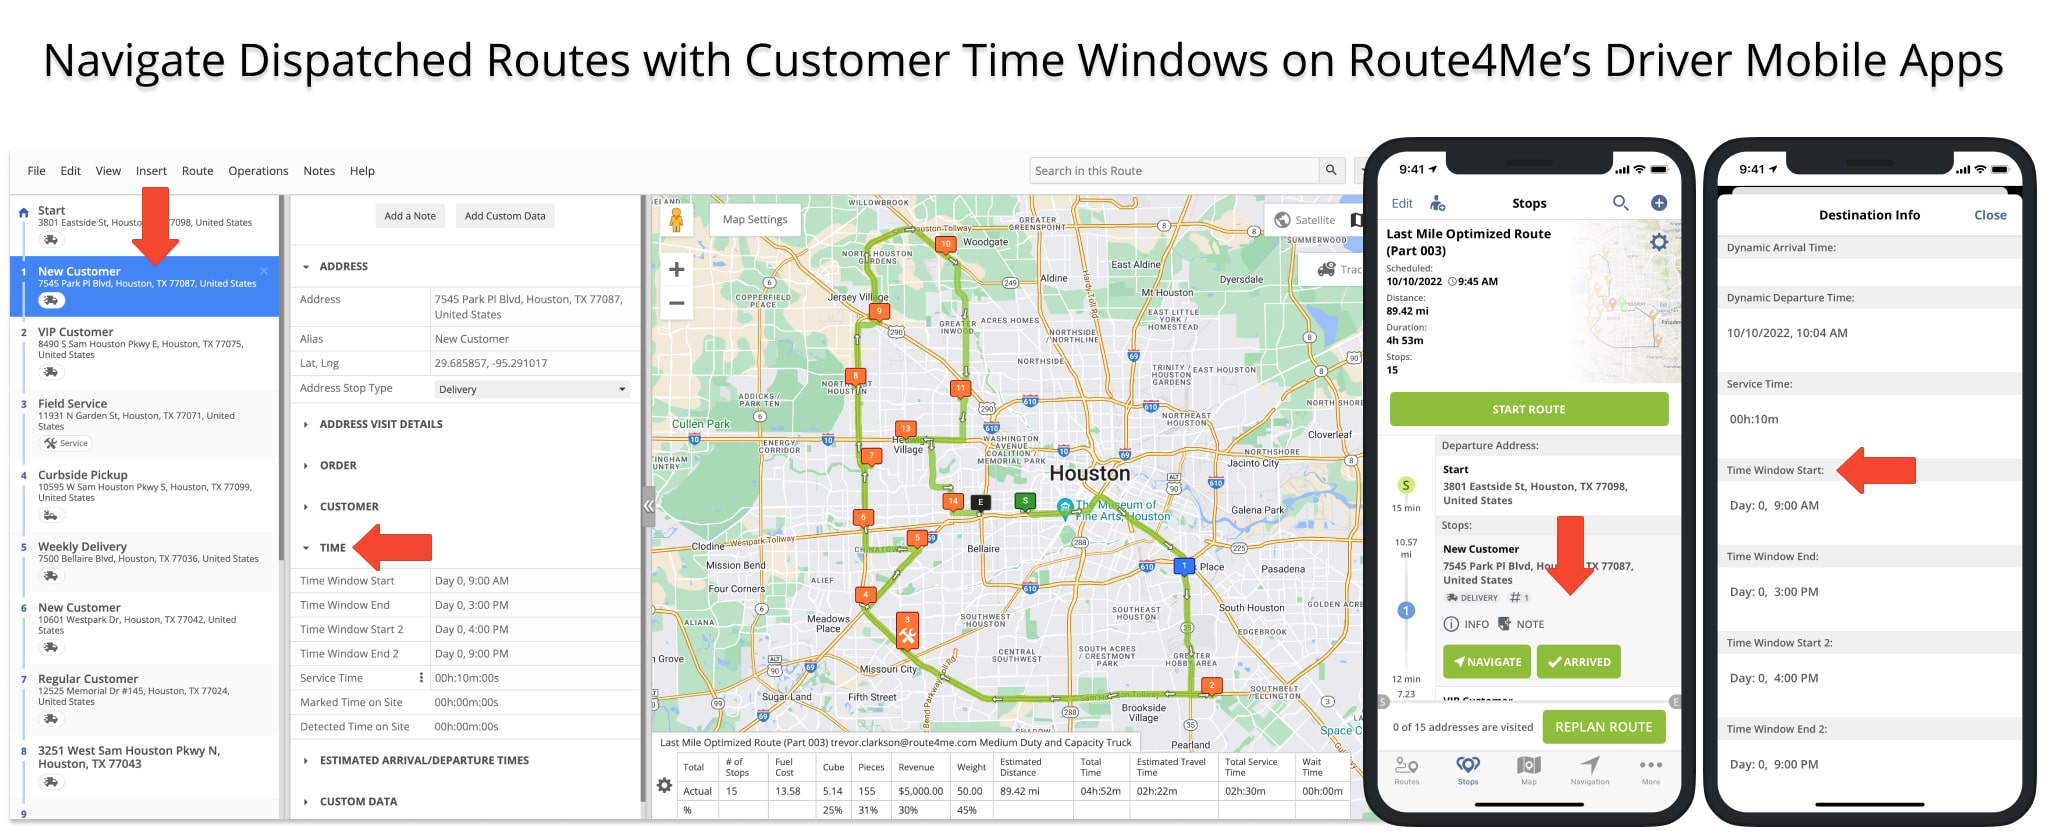 Customer Time Windows on dispatched driver routes opened using Route4Me's driver mobile apps.